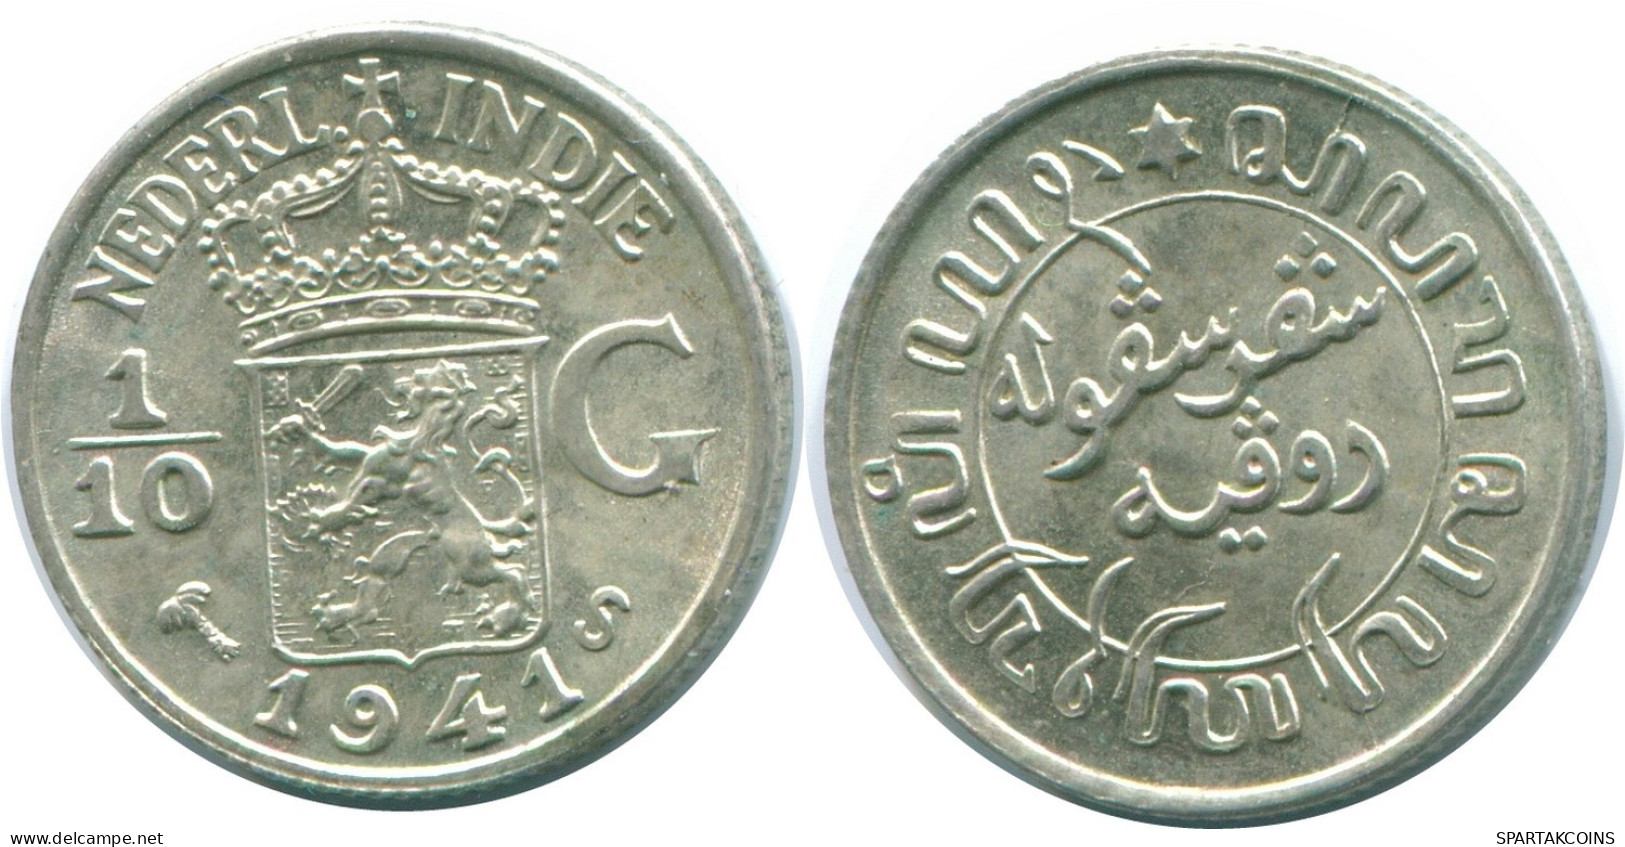 1/10 GULDEN 1941 S NETHERLANDS EAST INDIES SILVER Colonial Coin #NL13567.3.U.A - Dutch East Indies